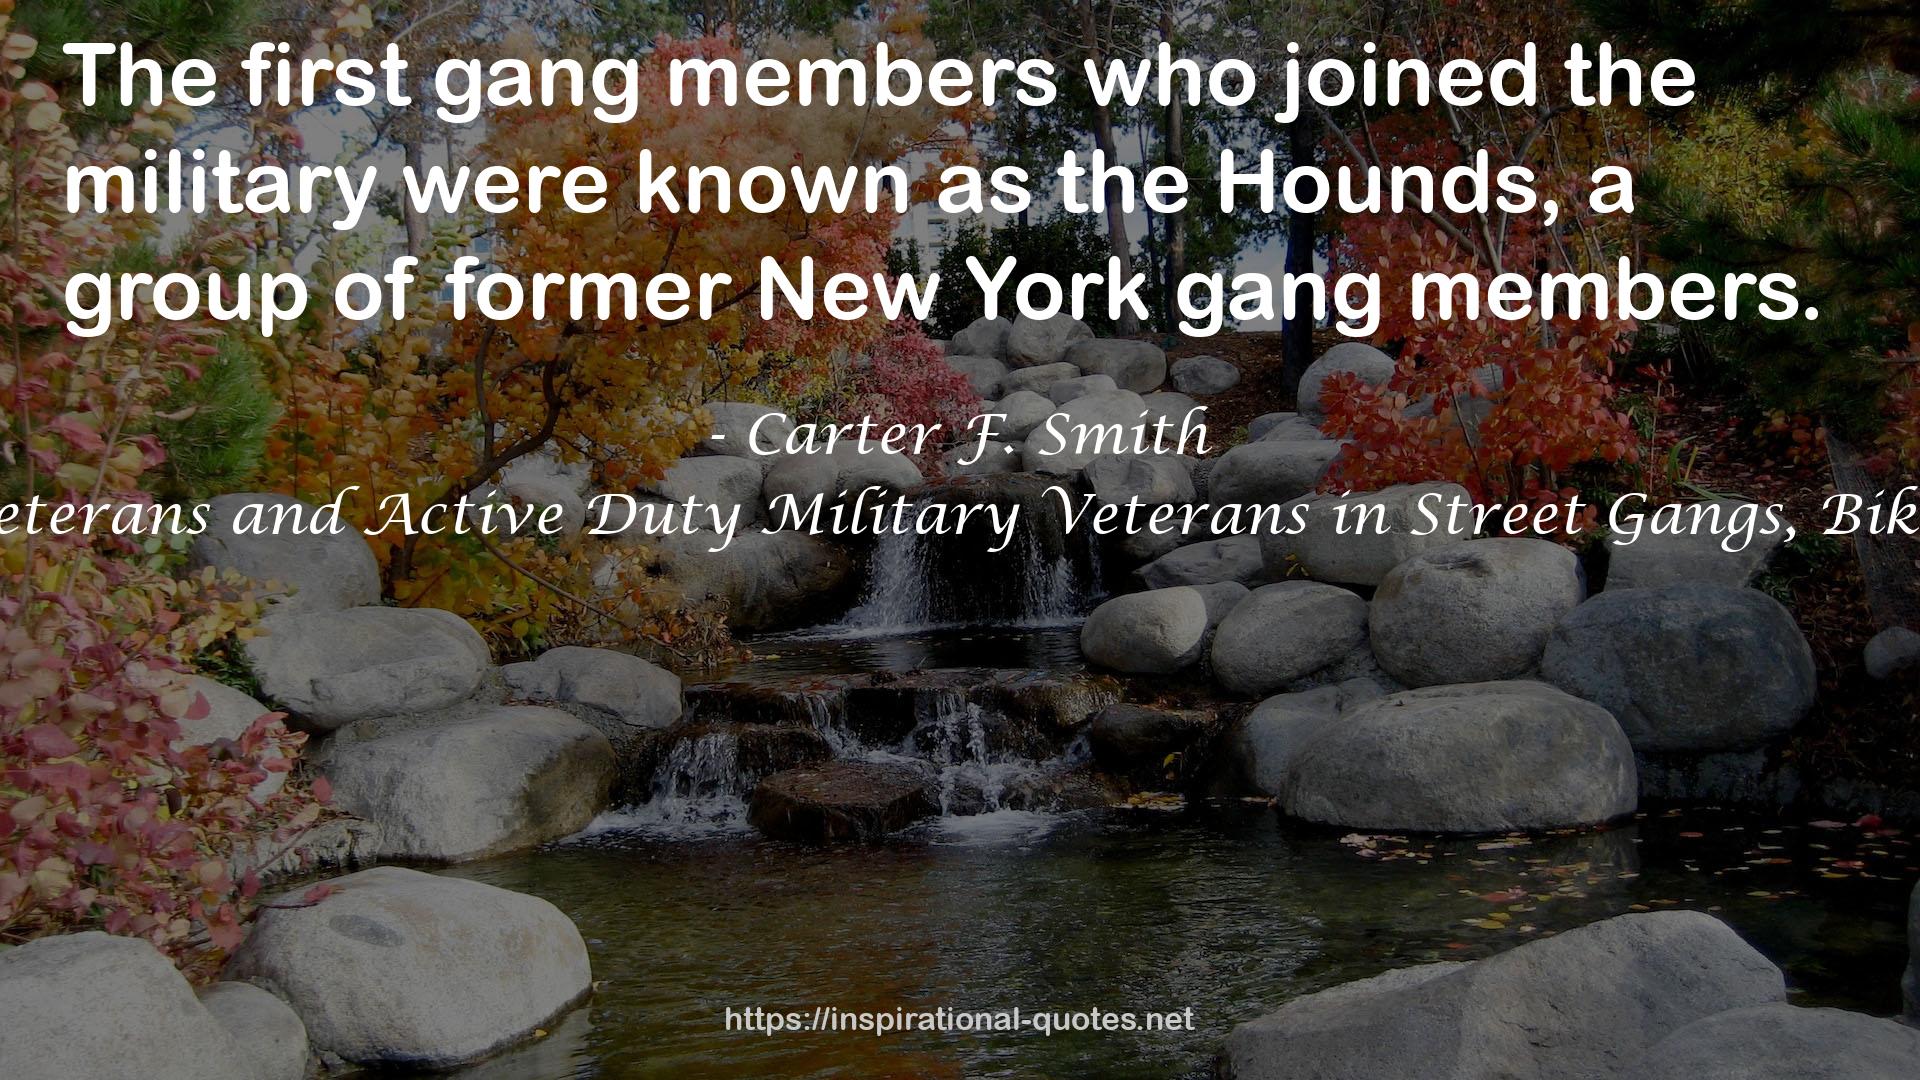 Gangs and the United States Military: Veterans and Active Duty Military Veterans in Street Gangs, Biker Gangs, and Domestic Terrorist Groups QUOTES